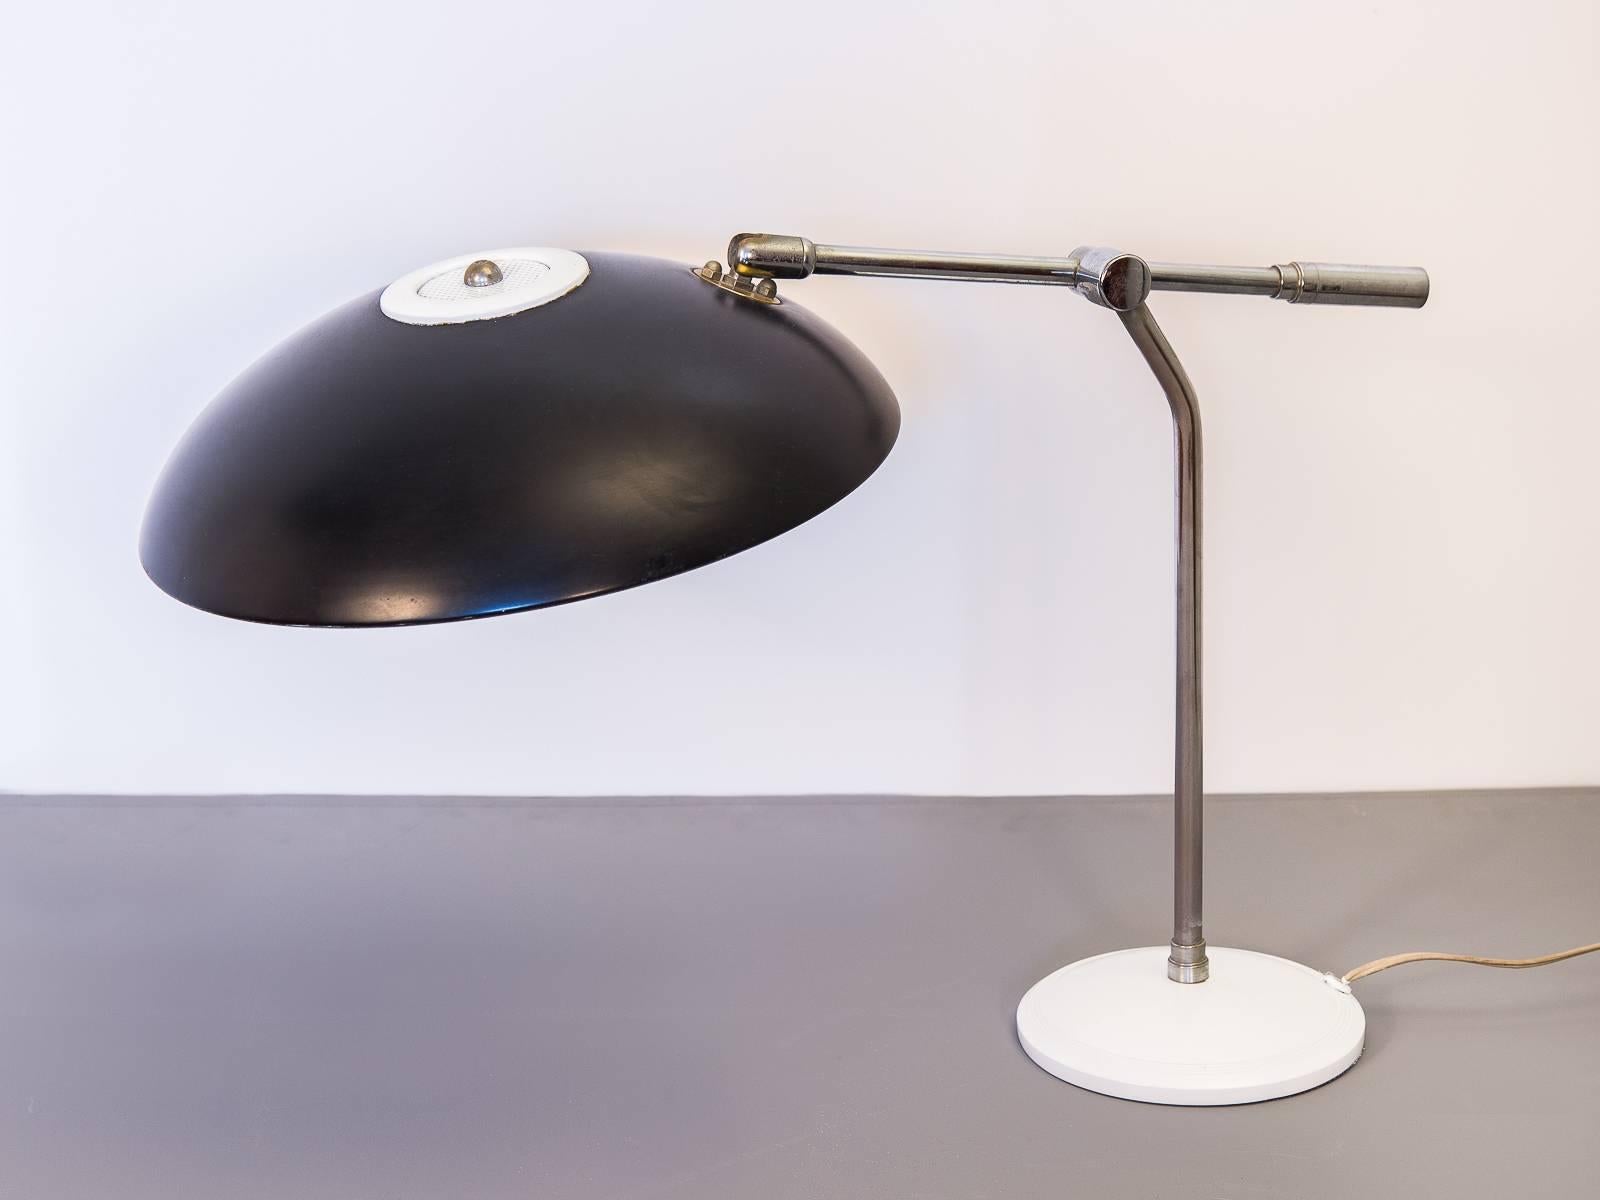 Very scarce, articulating table lamp designed by Gerald Thurston for Lightolier. A fine office companion. This vintage lamp has minimal wear and is in perfect working condition. Sleek, articulating chrome arm controls the shade's height and angle.